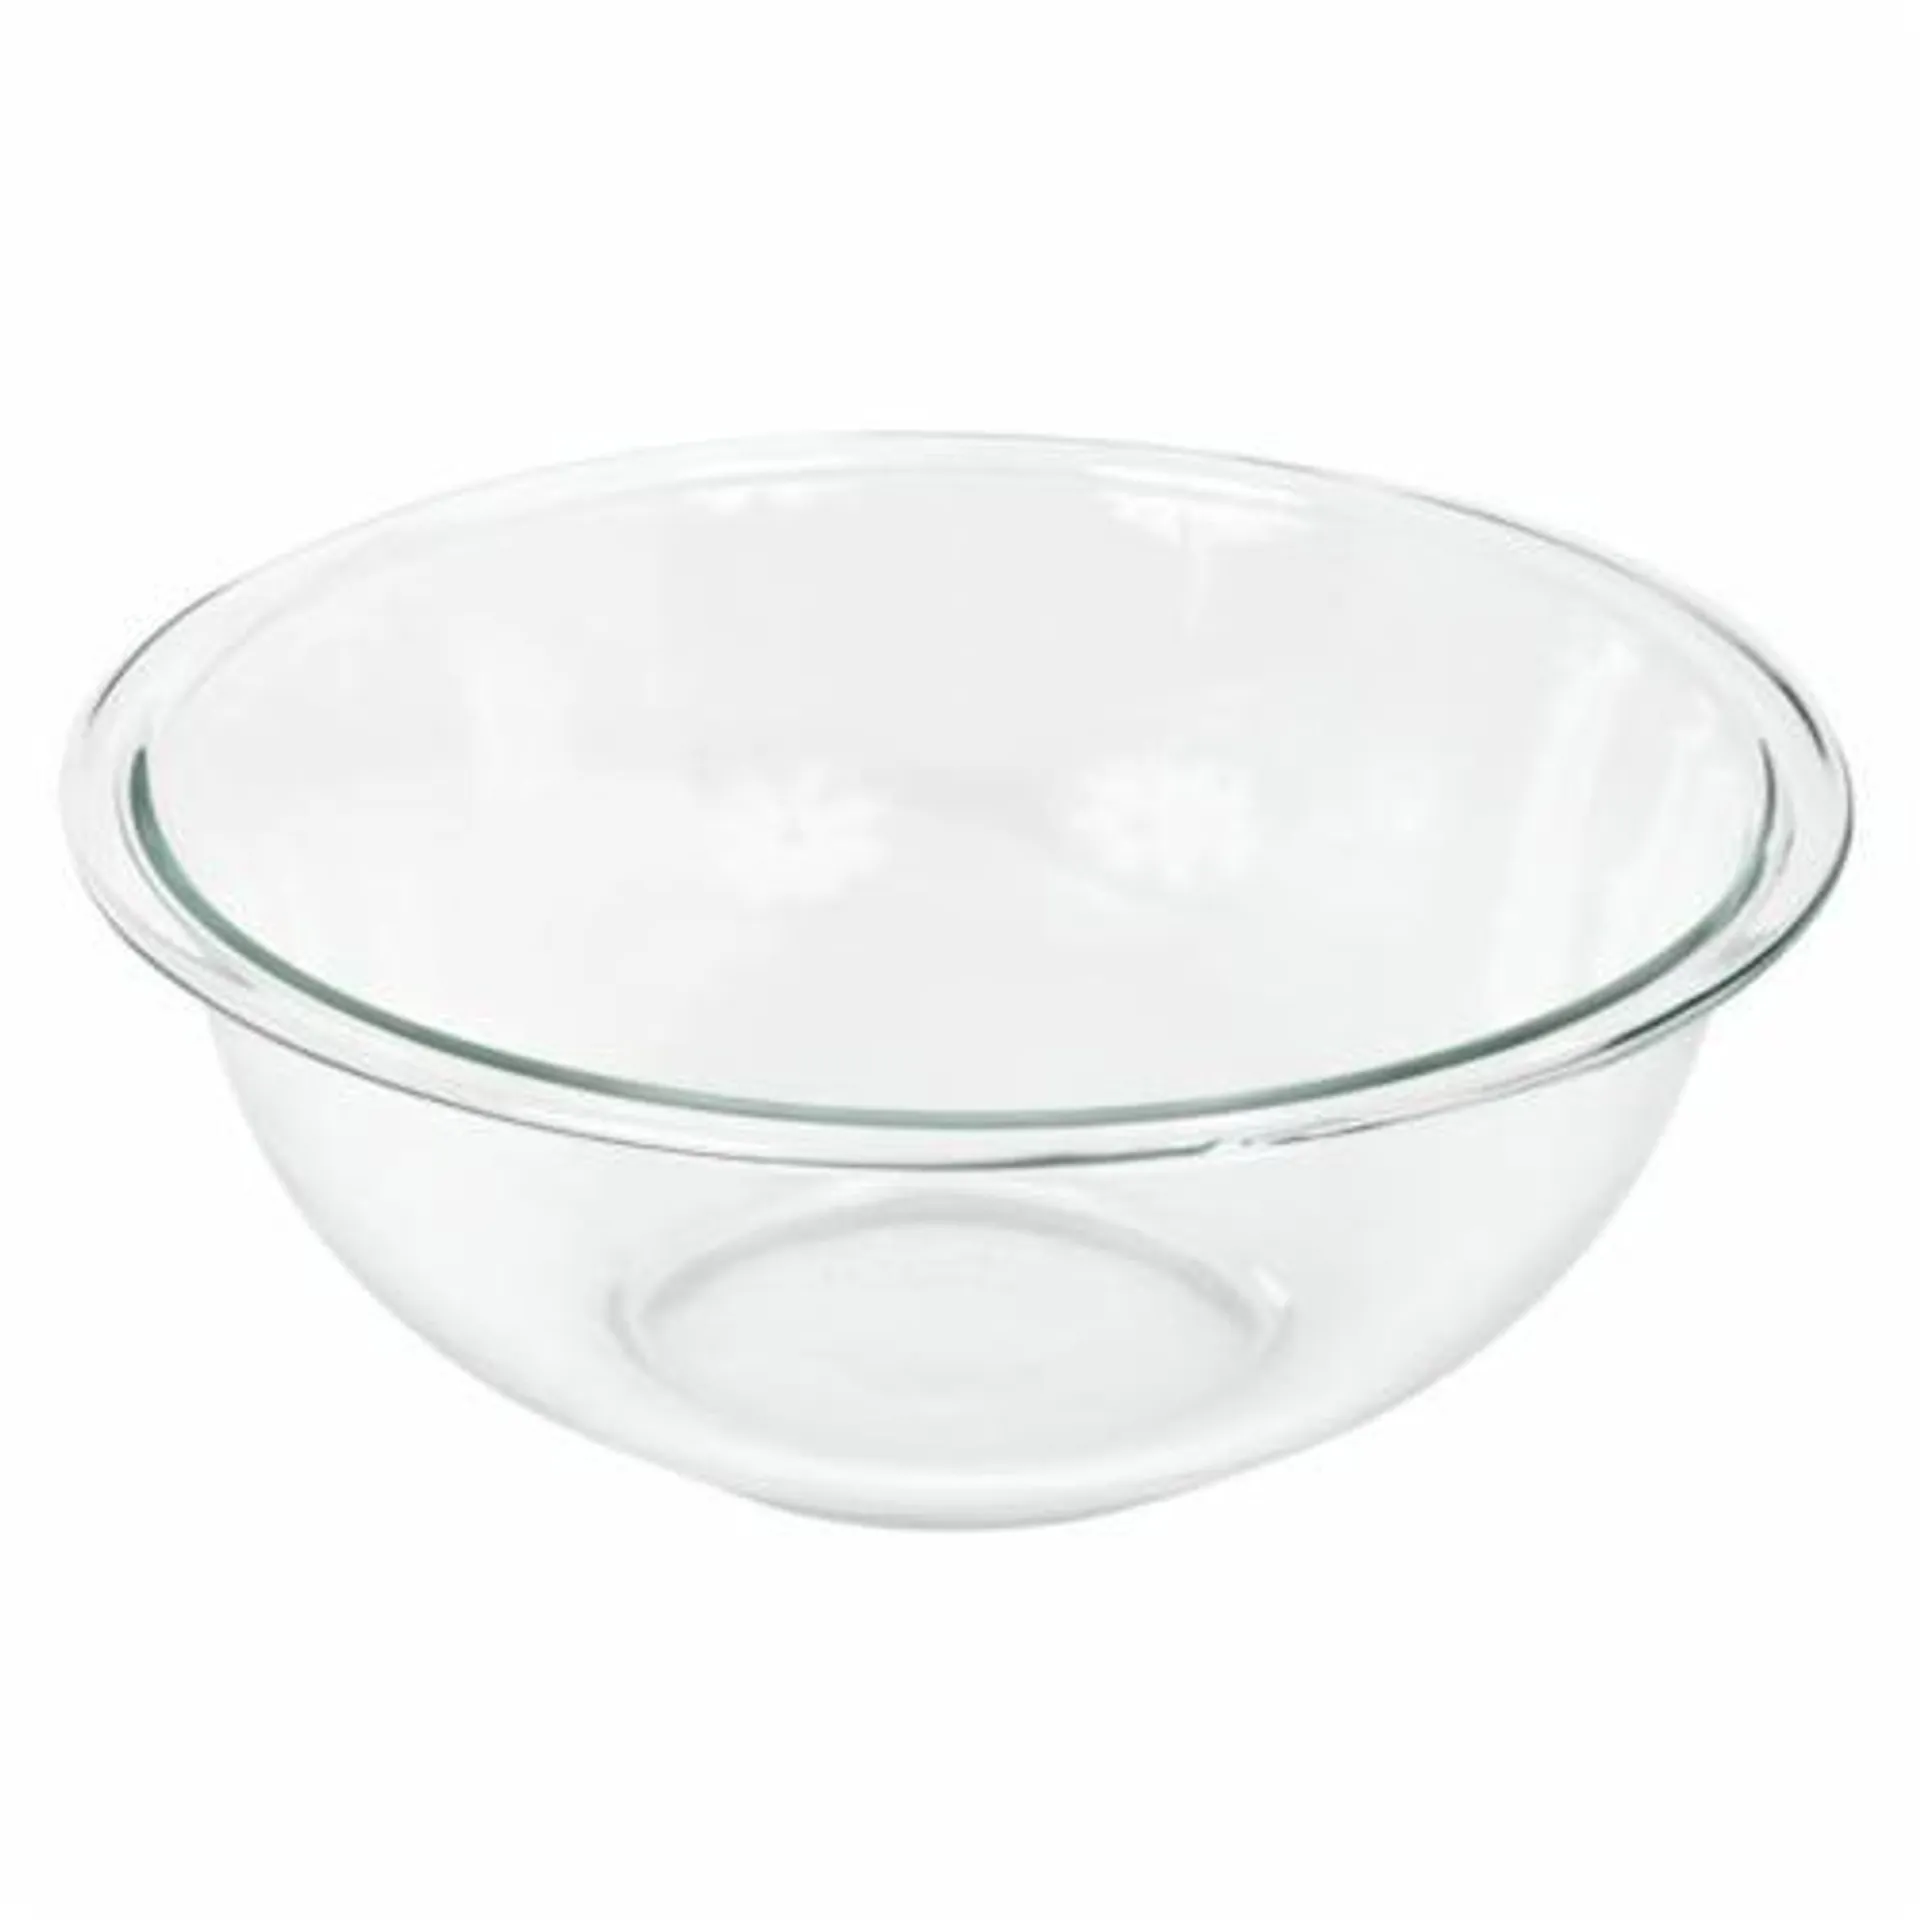 Pyrex Prepware, 2-1/2-Quart Rimmed Mixing Bowl, Clear - 1 each (Pack of 4)